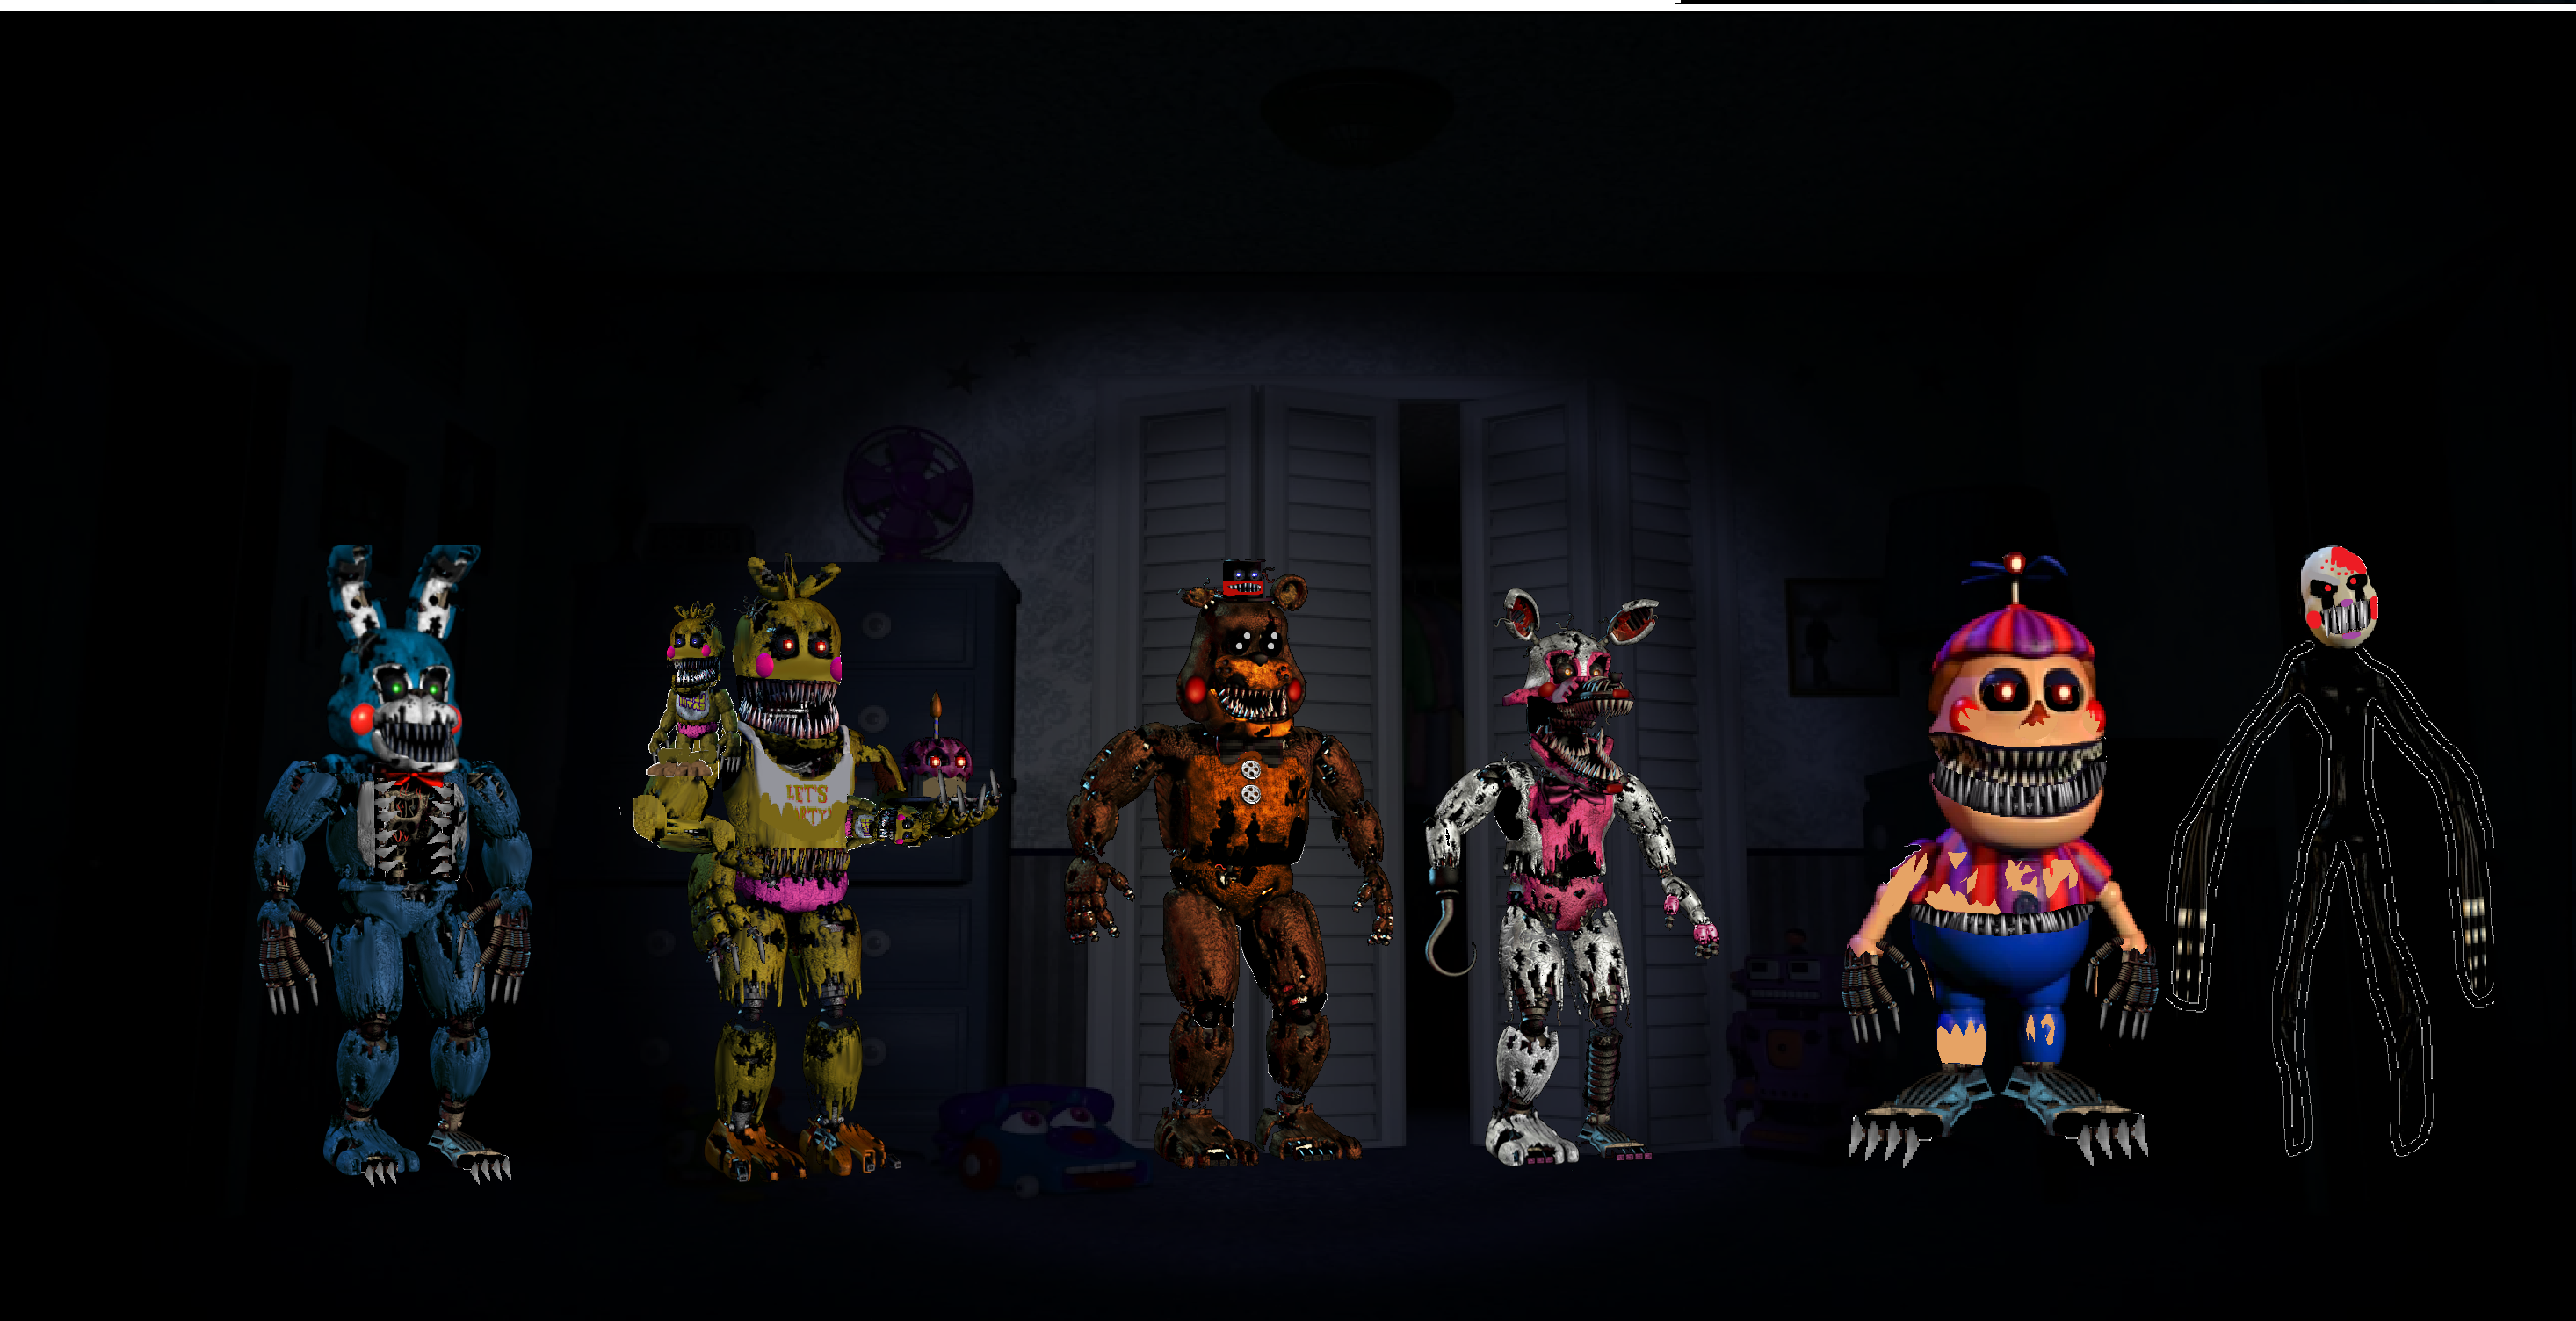 Fnaf 4 Halloween Edition For Android - Colaboratory